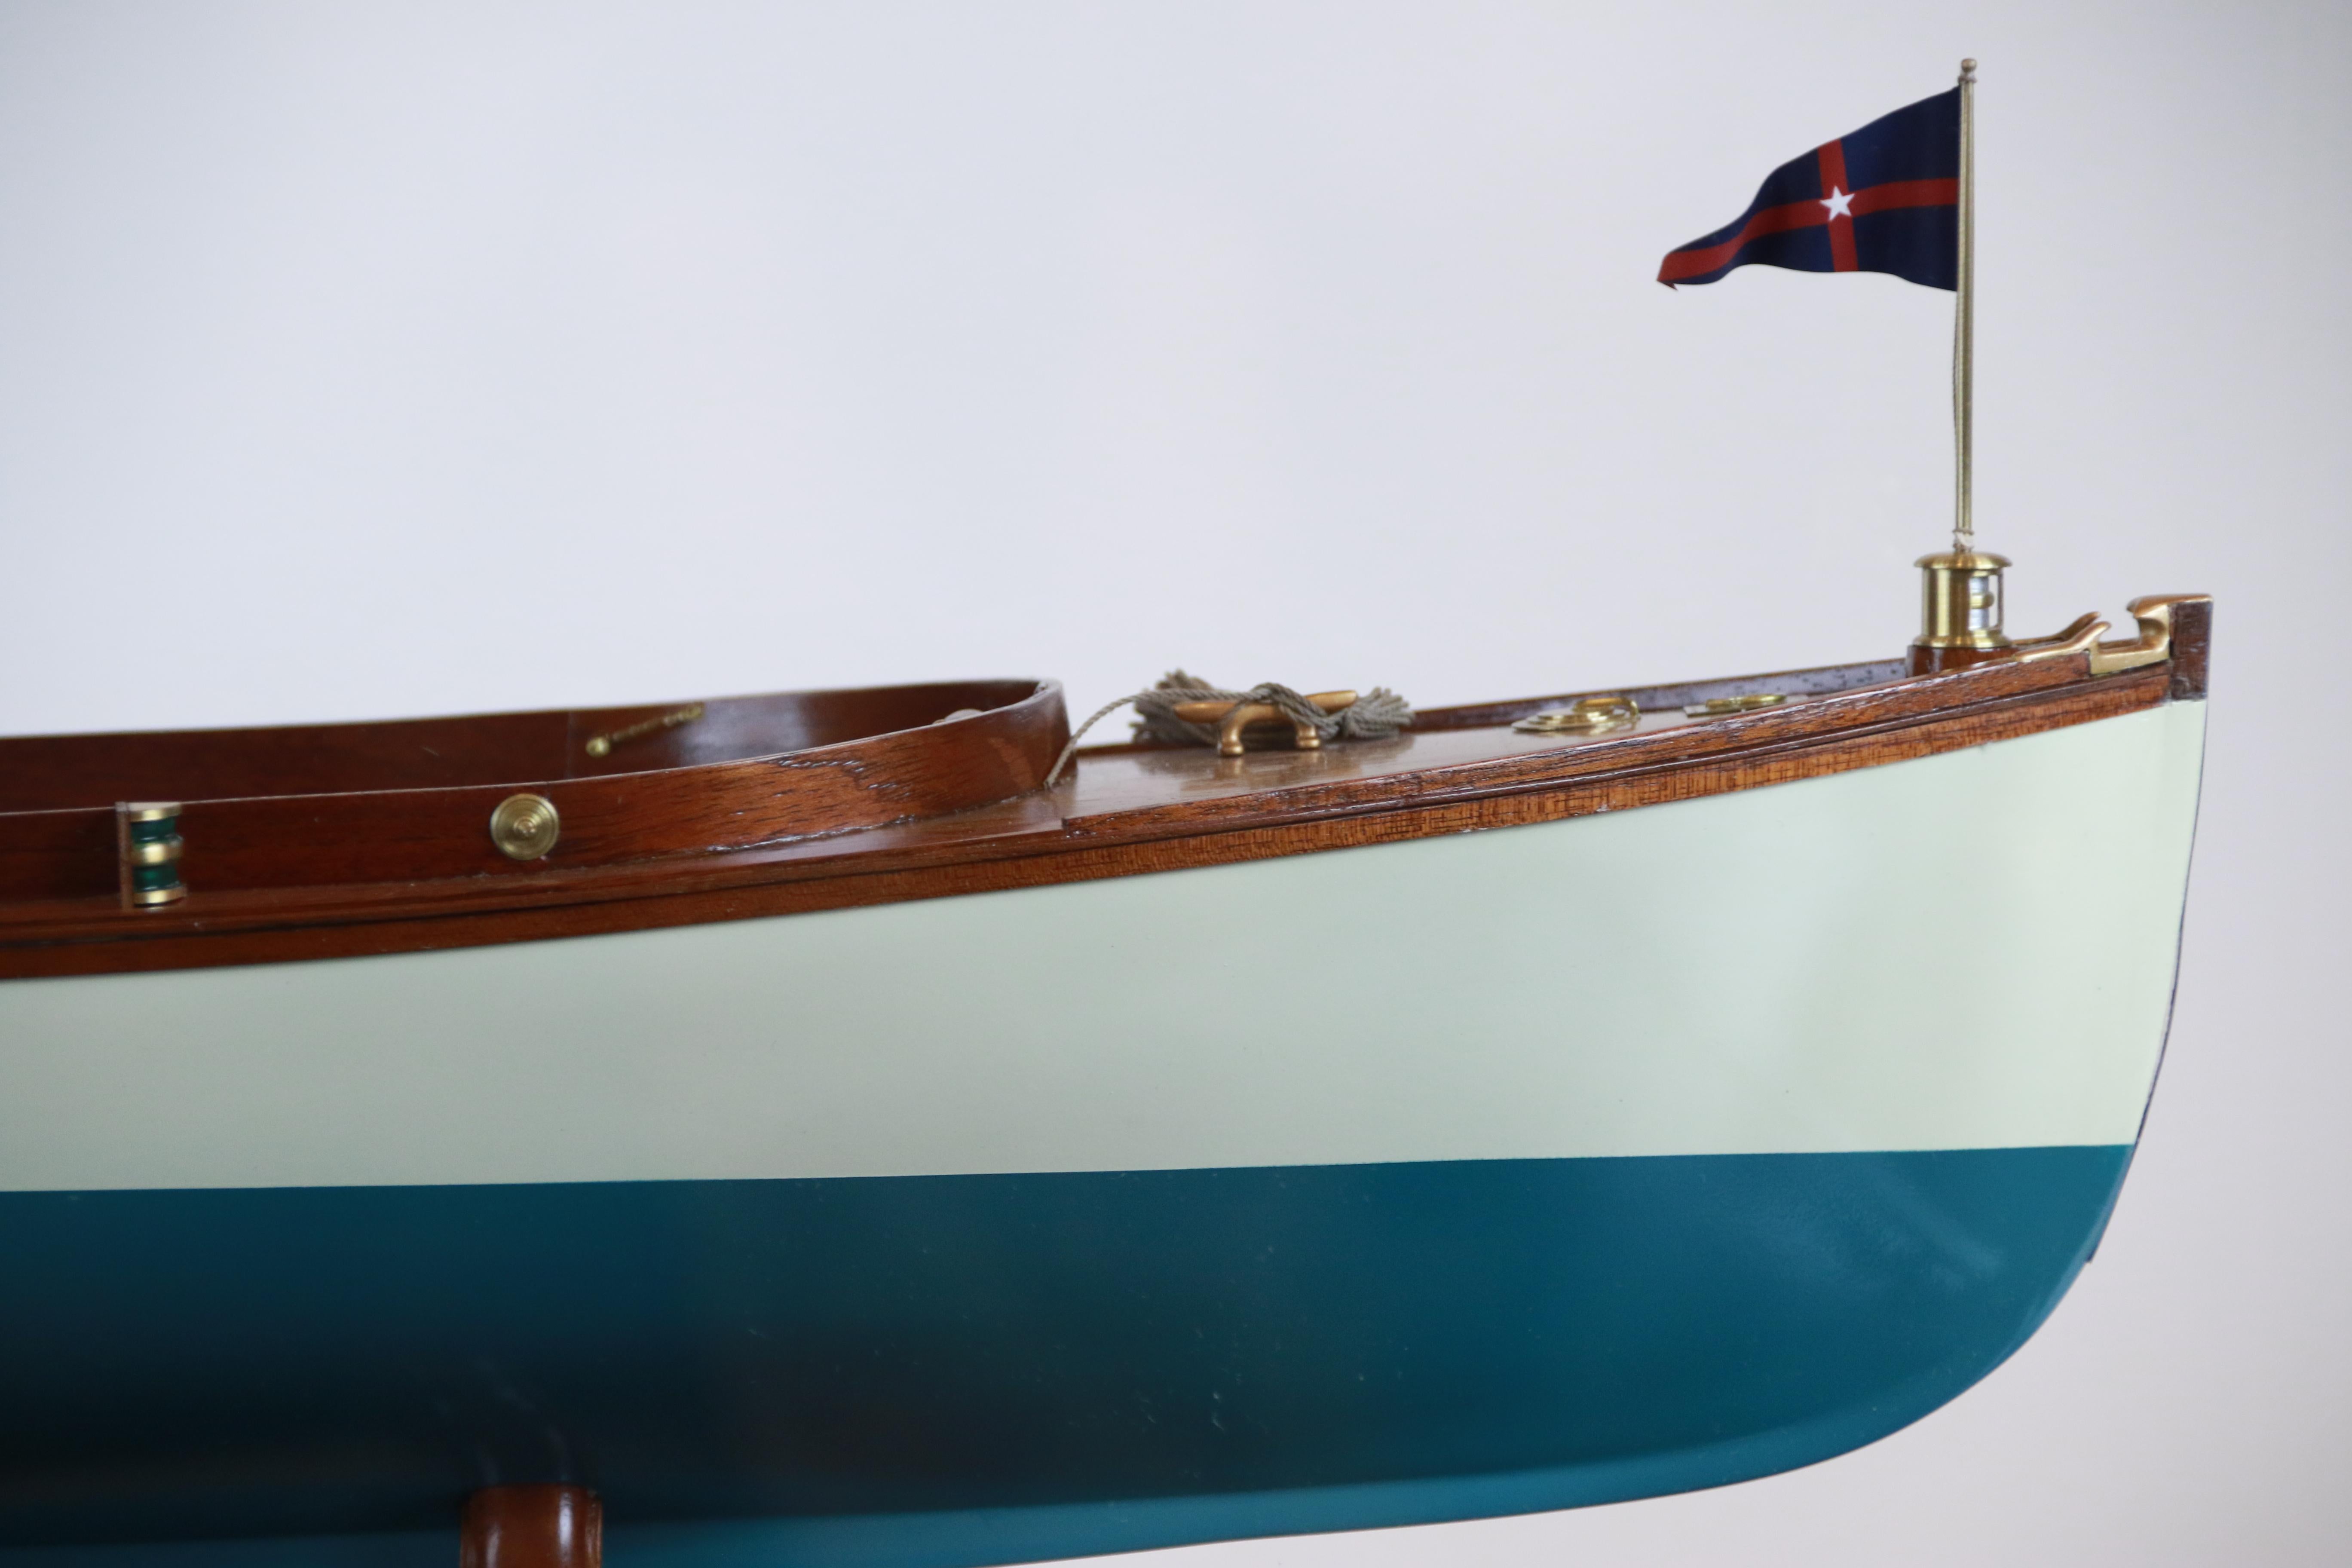 Precise model of the launch that J.P. Morgan would take to get to and from his palatial yacht 